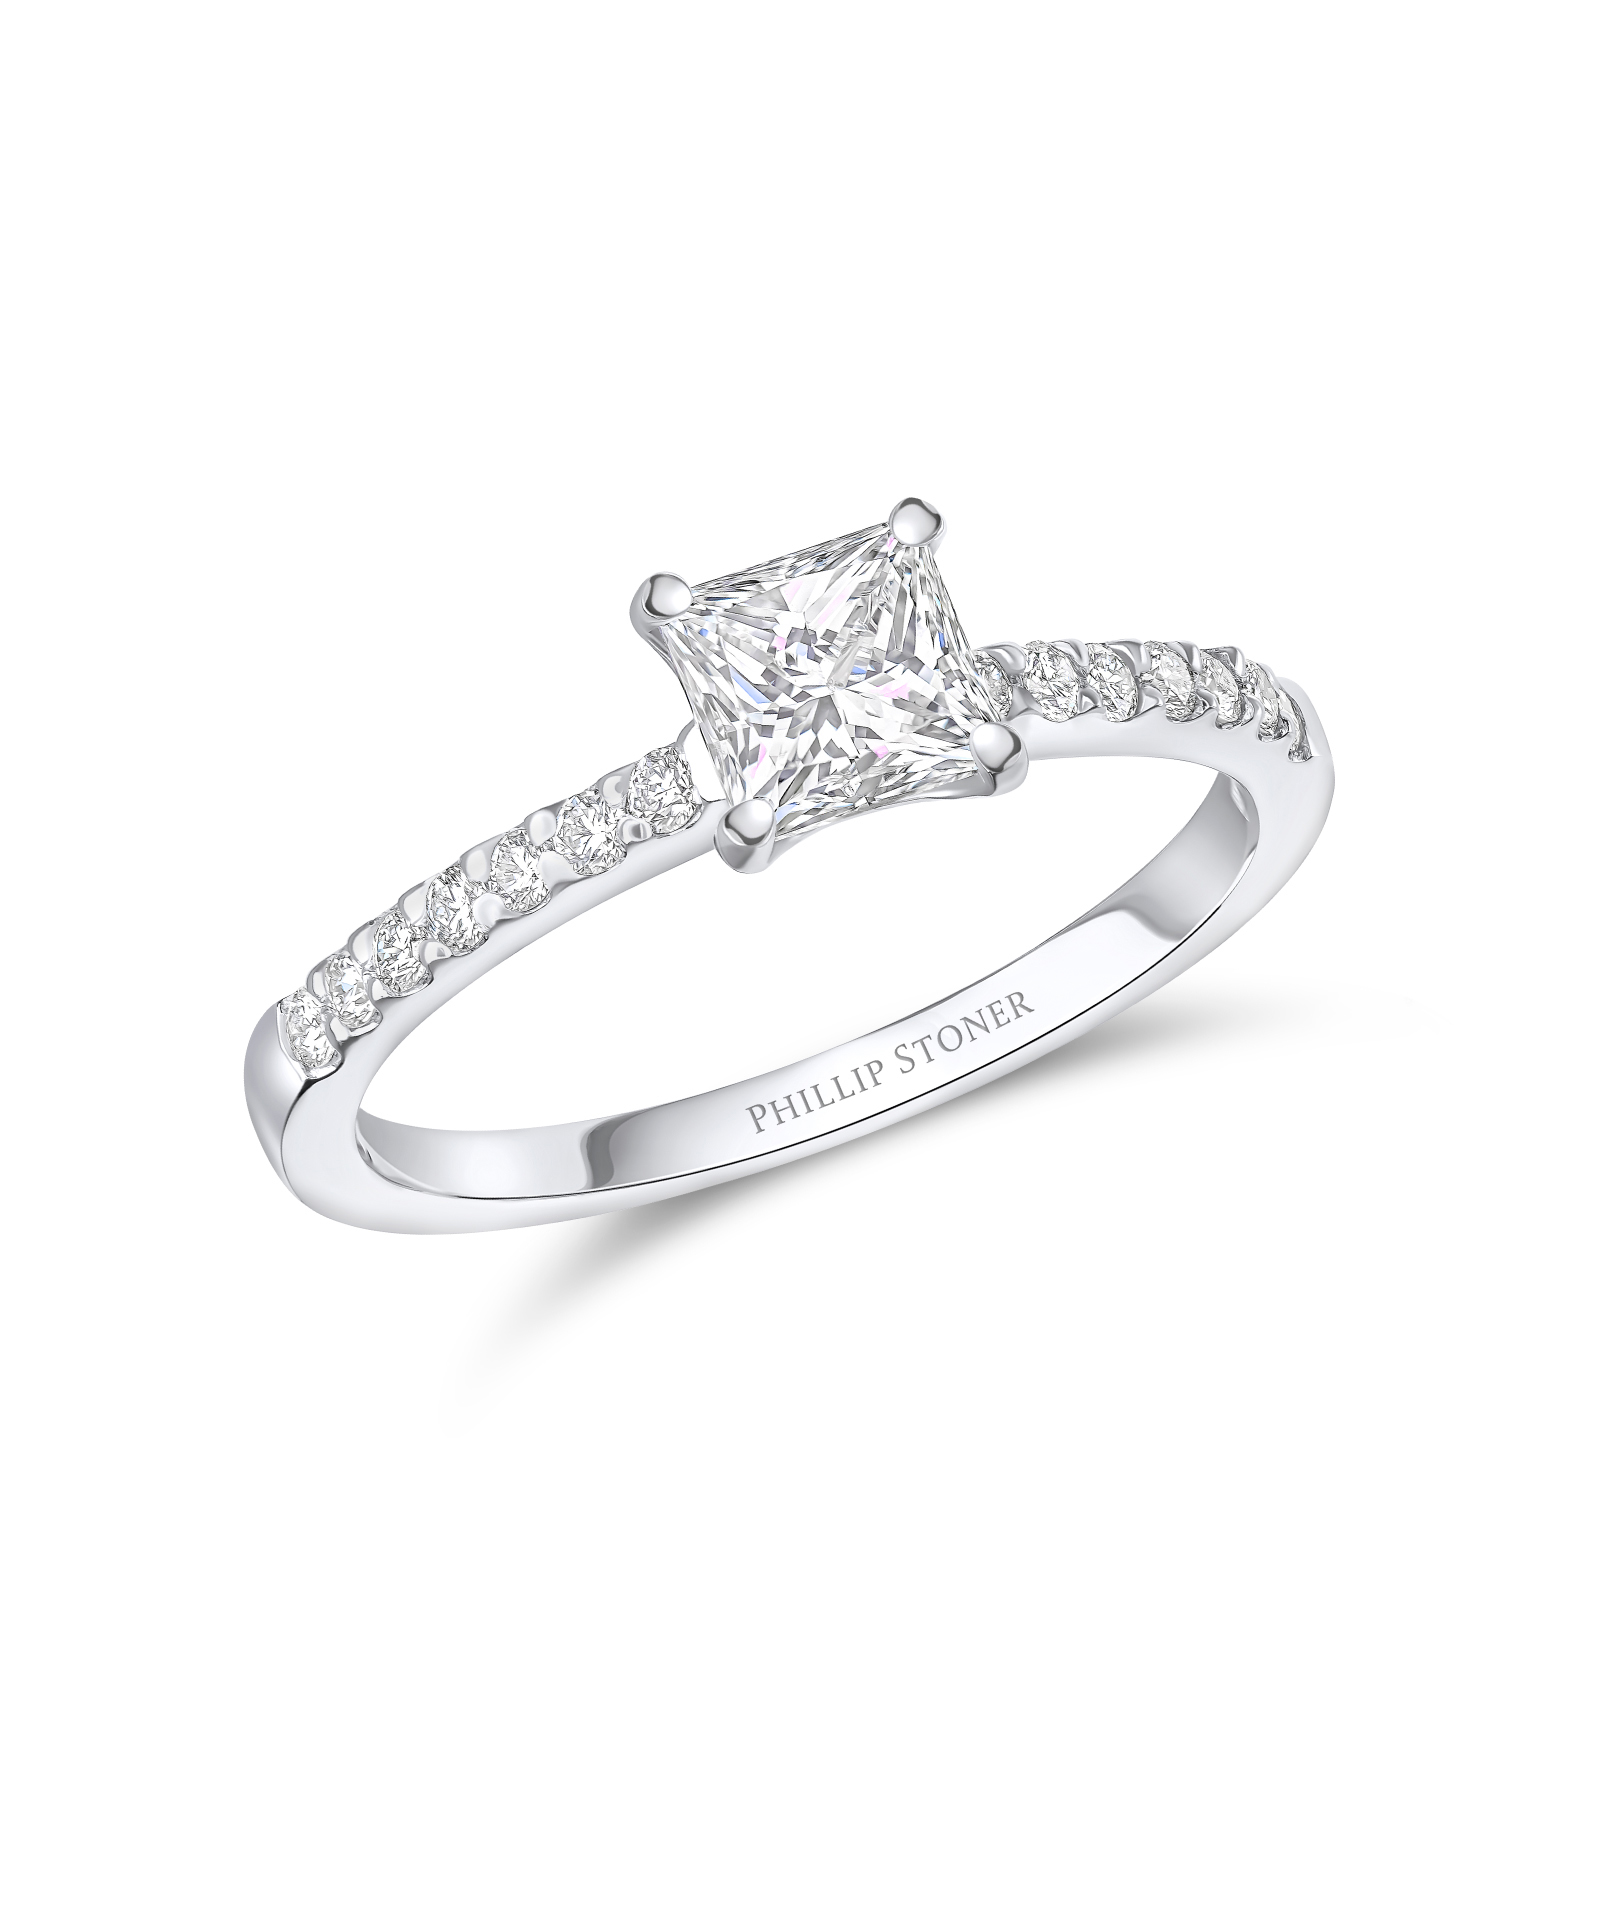 0.70ct Princess Cut Diamond Ring with Scallop Set Shoulders - Phillip Stoner The Jeweller